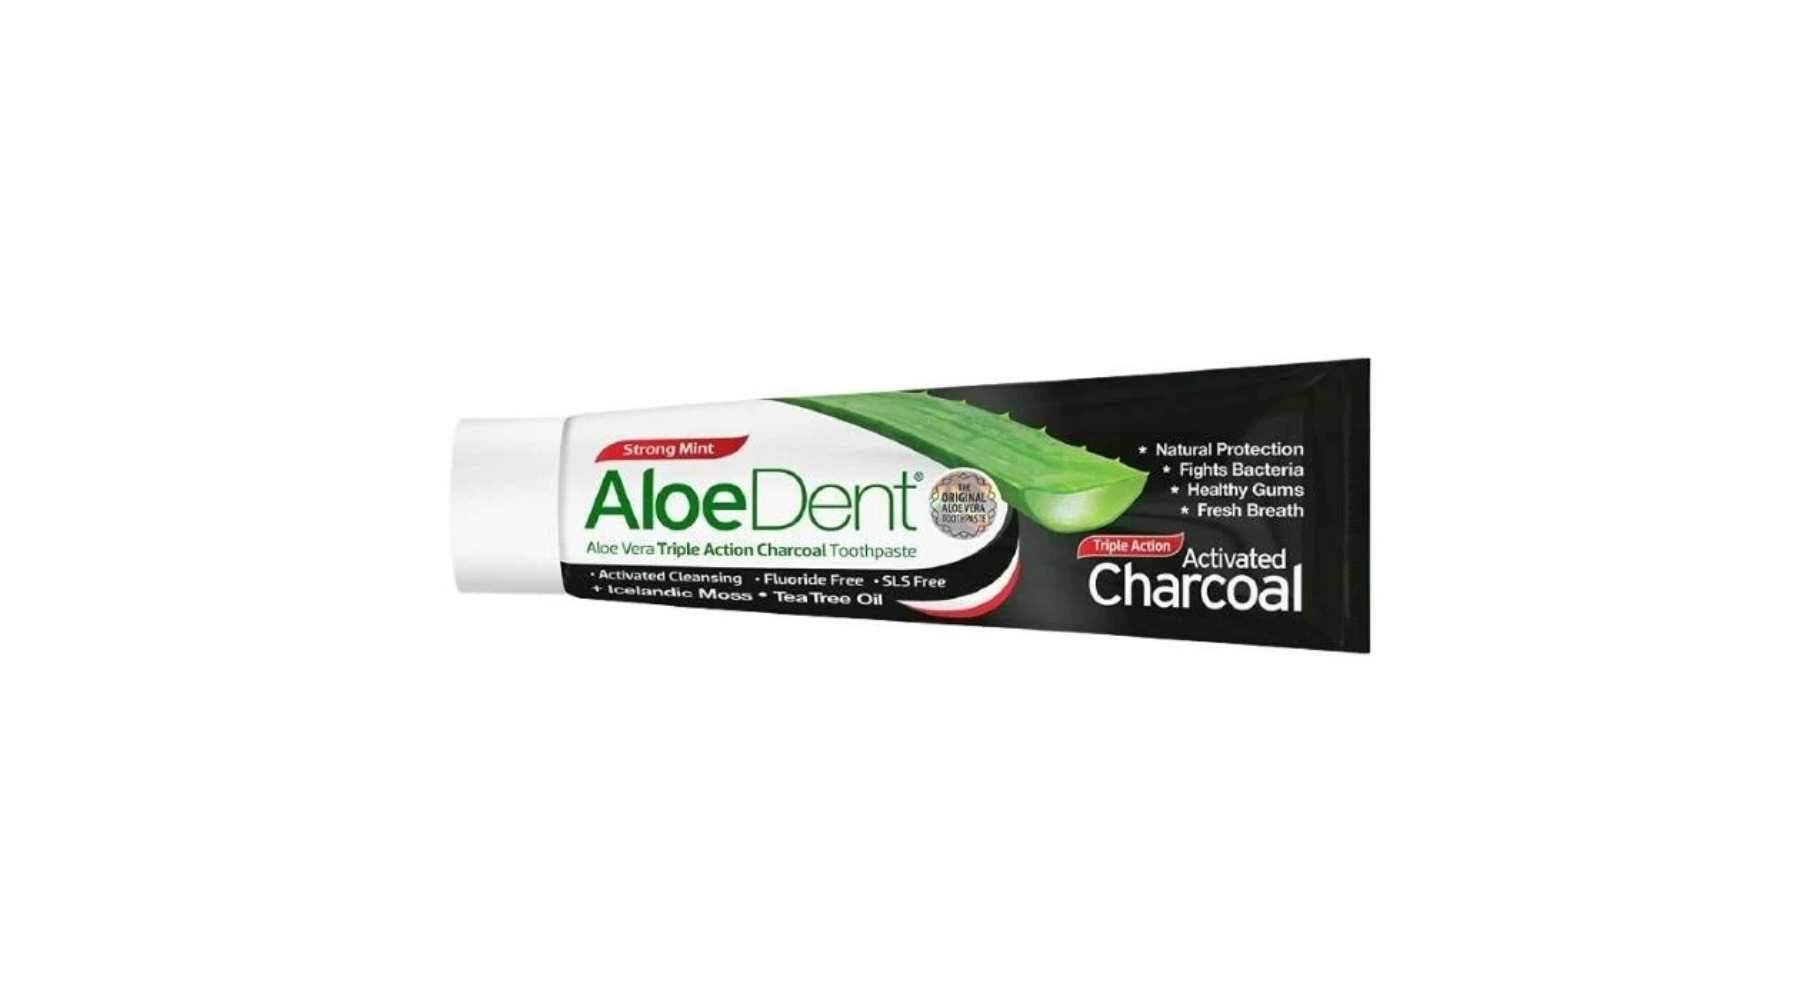 Aloedent - Triple Action Charcoal Toothpaste